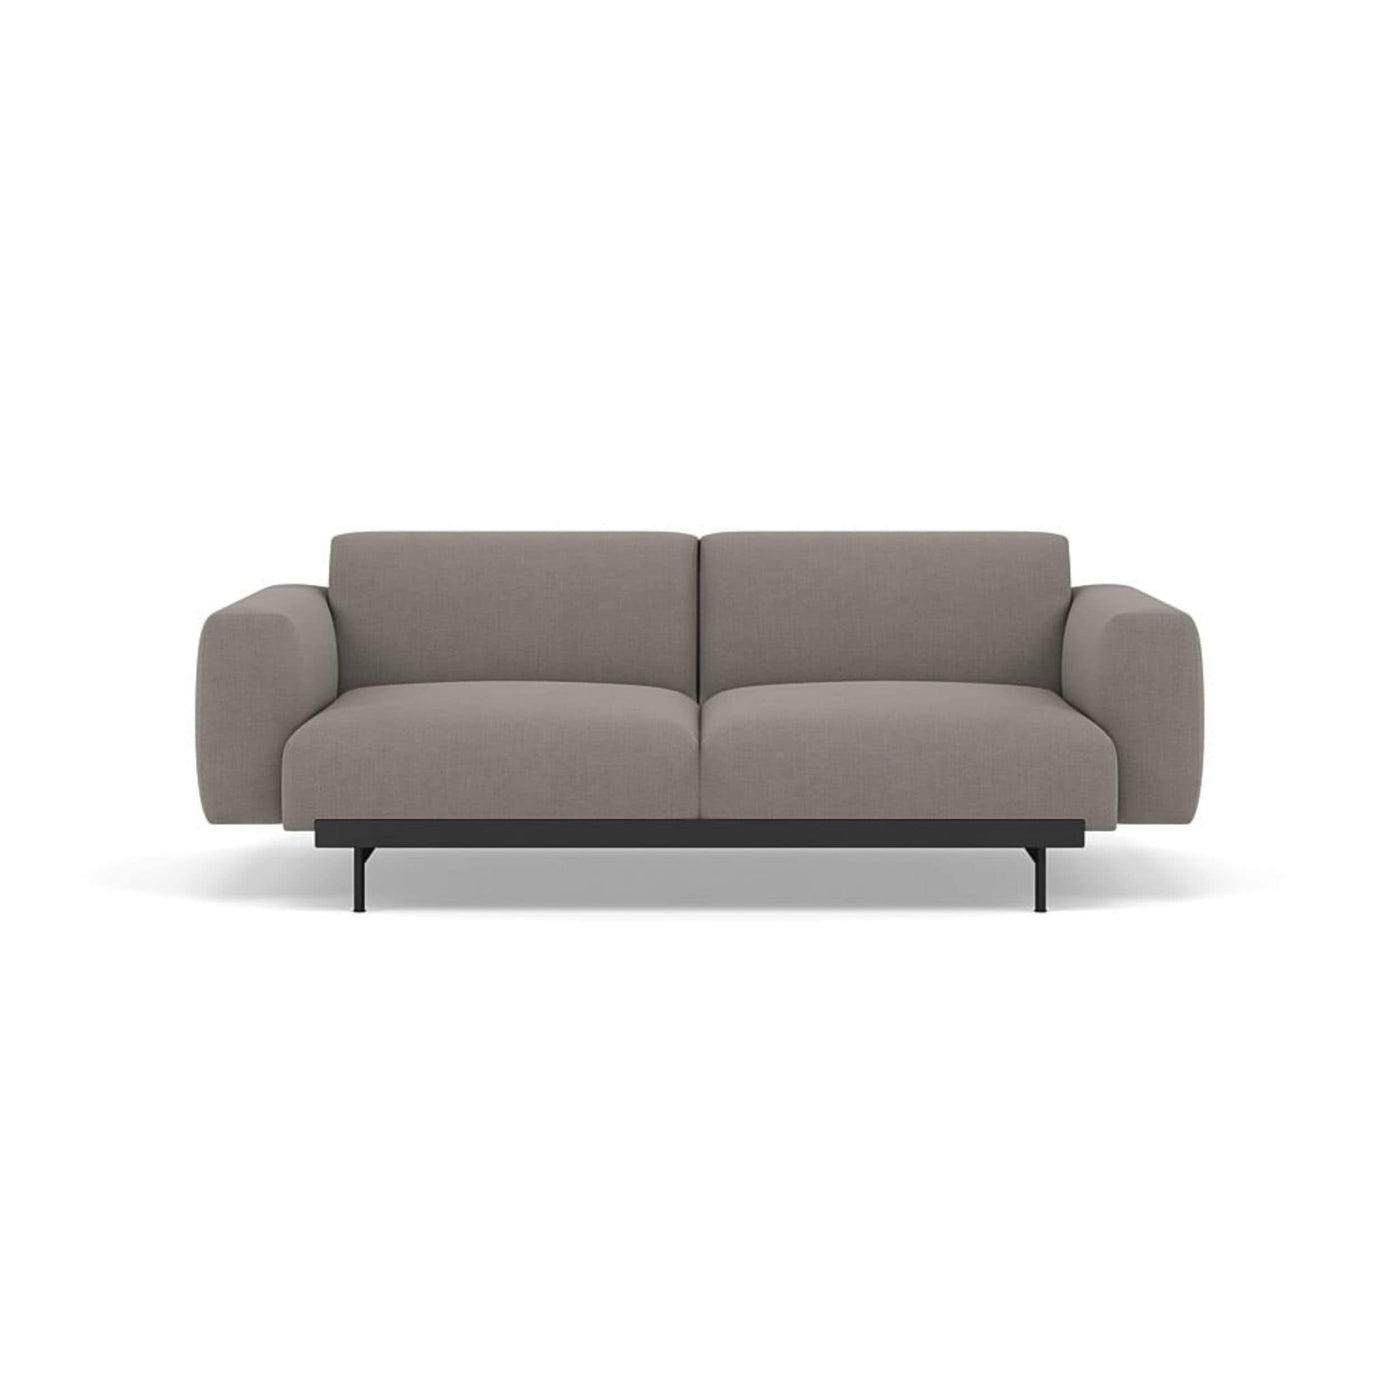 Muuto In Situ 2 Seater sofa in configuration 1. Made to order from someday designs. #colour_fiord-262